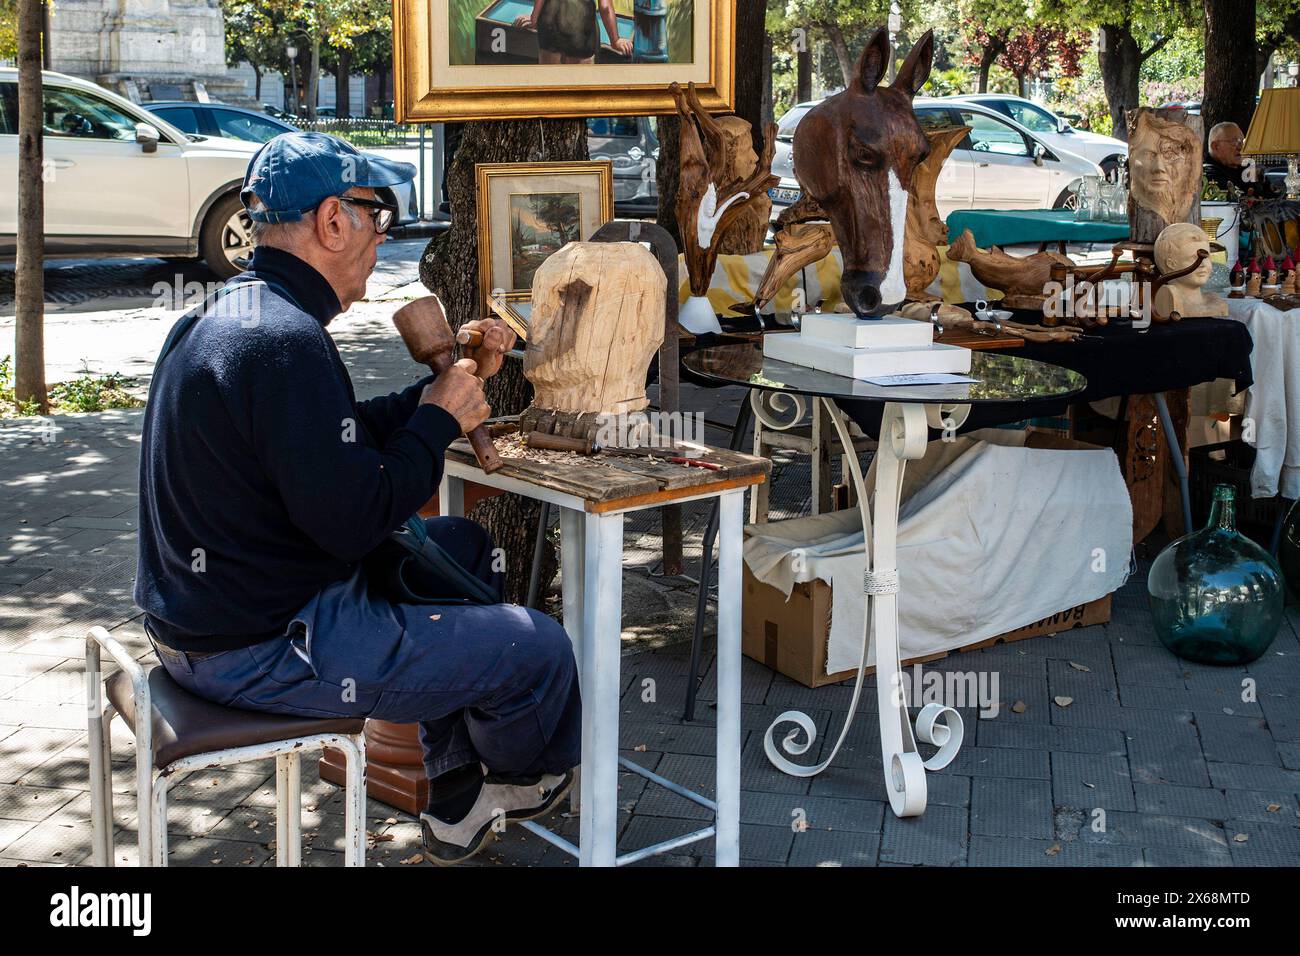 Artisan Wood Carver Crafting Sculptures at an Outdoor Market in Trani, Italy. Stock Photo